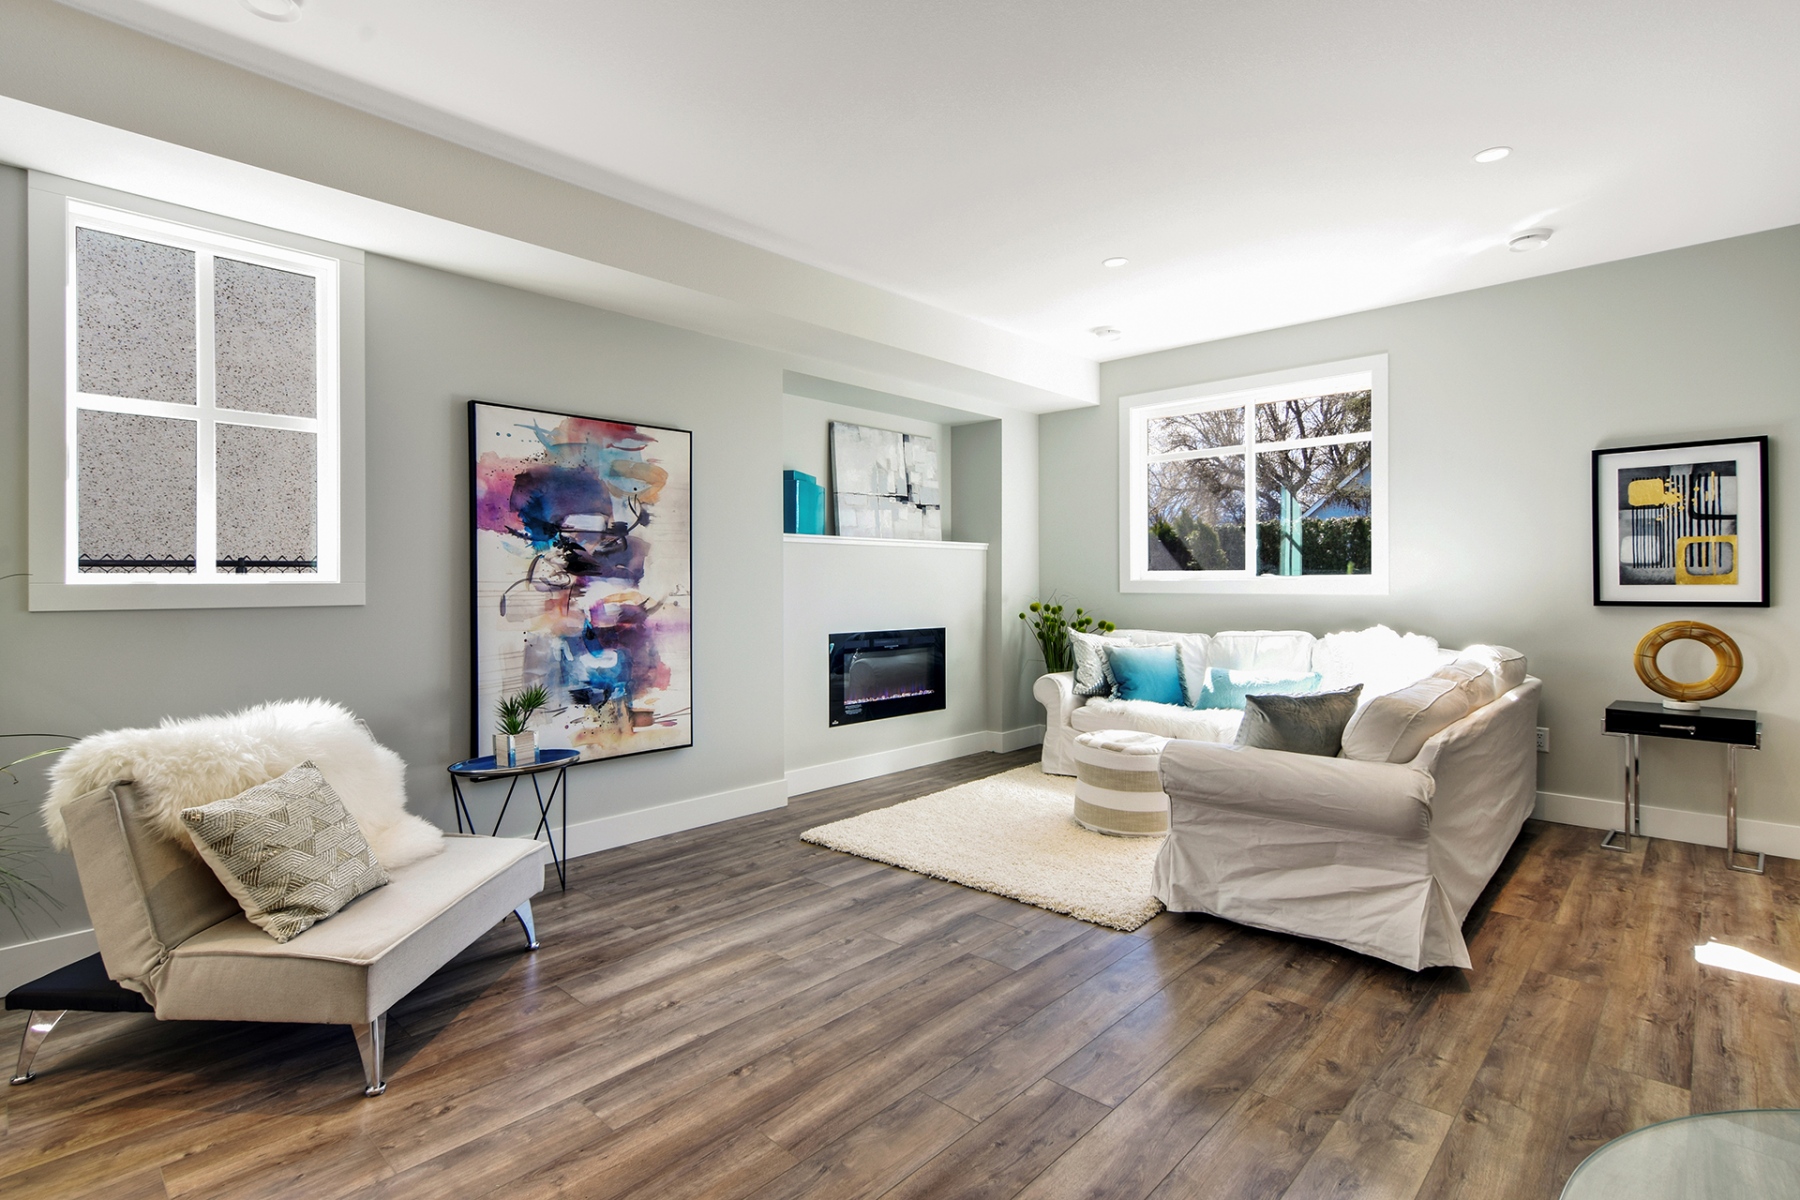 1_harmony_homes_glenwood_infill_project_living_room_gallery_image_7